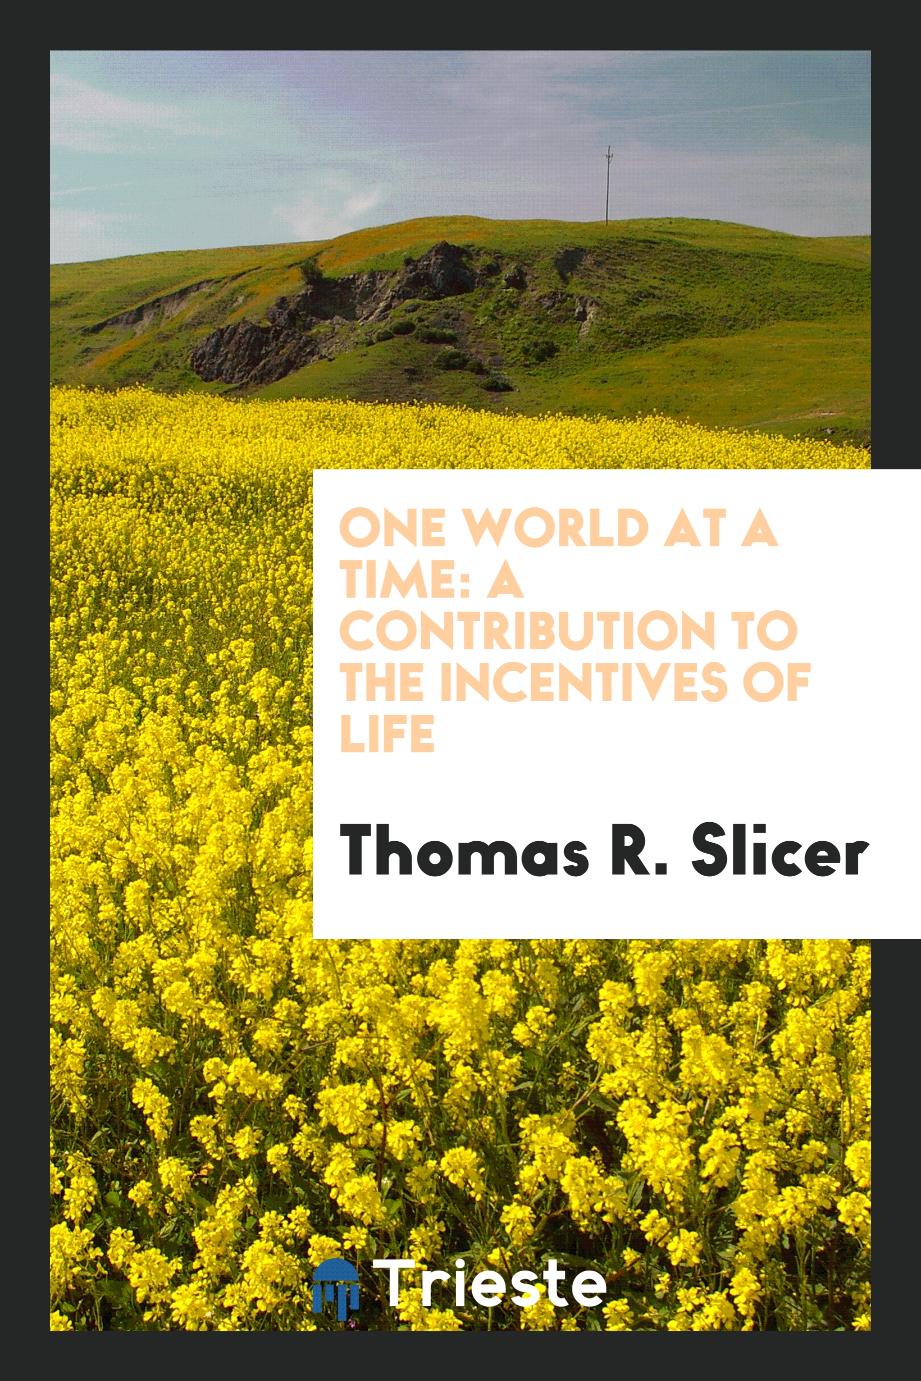 One World at a Time: A Contribution to the Incentives of Life